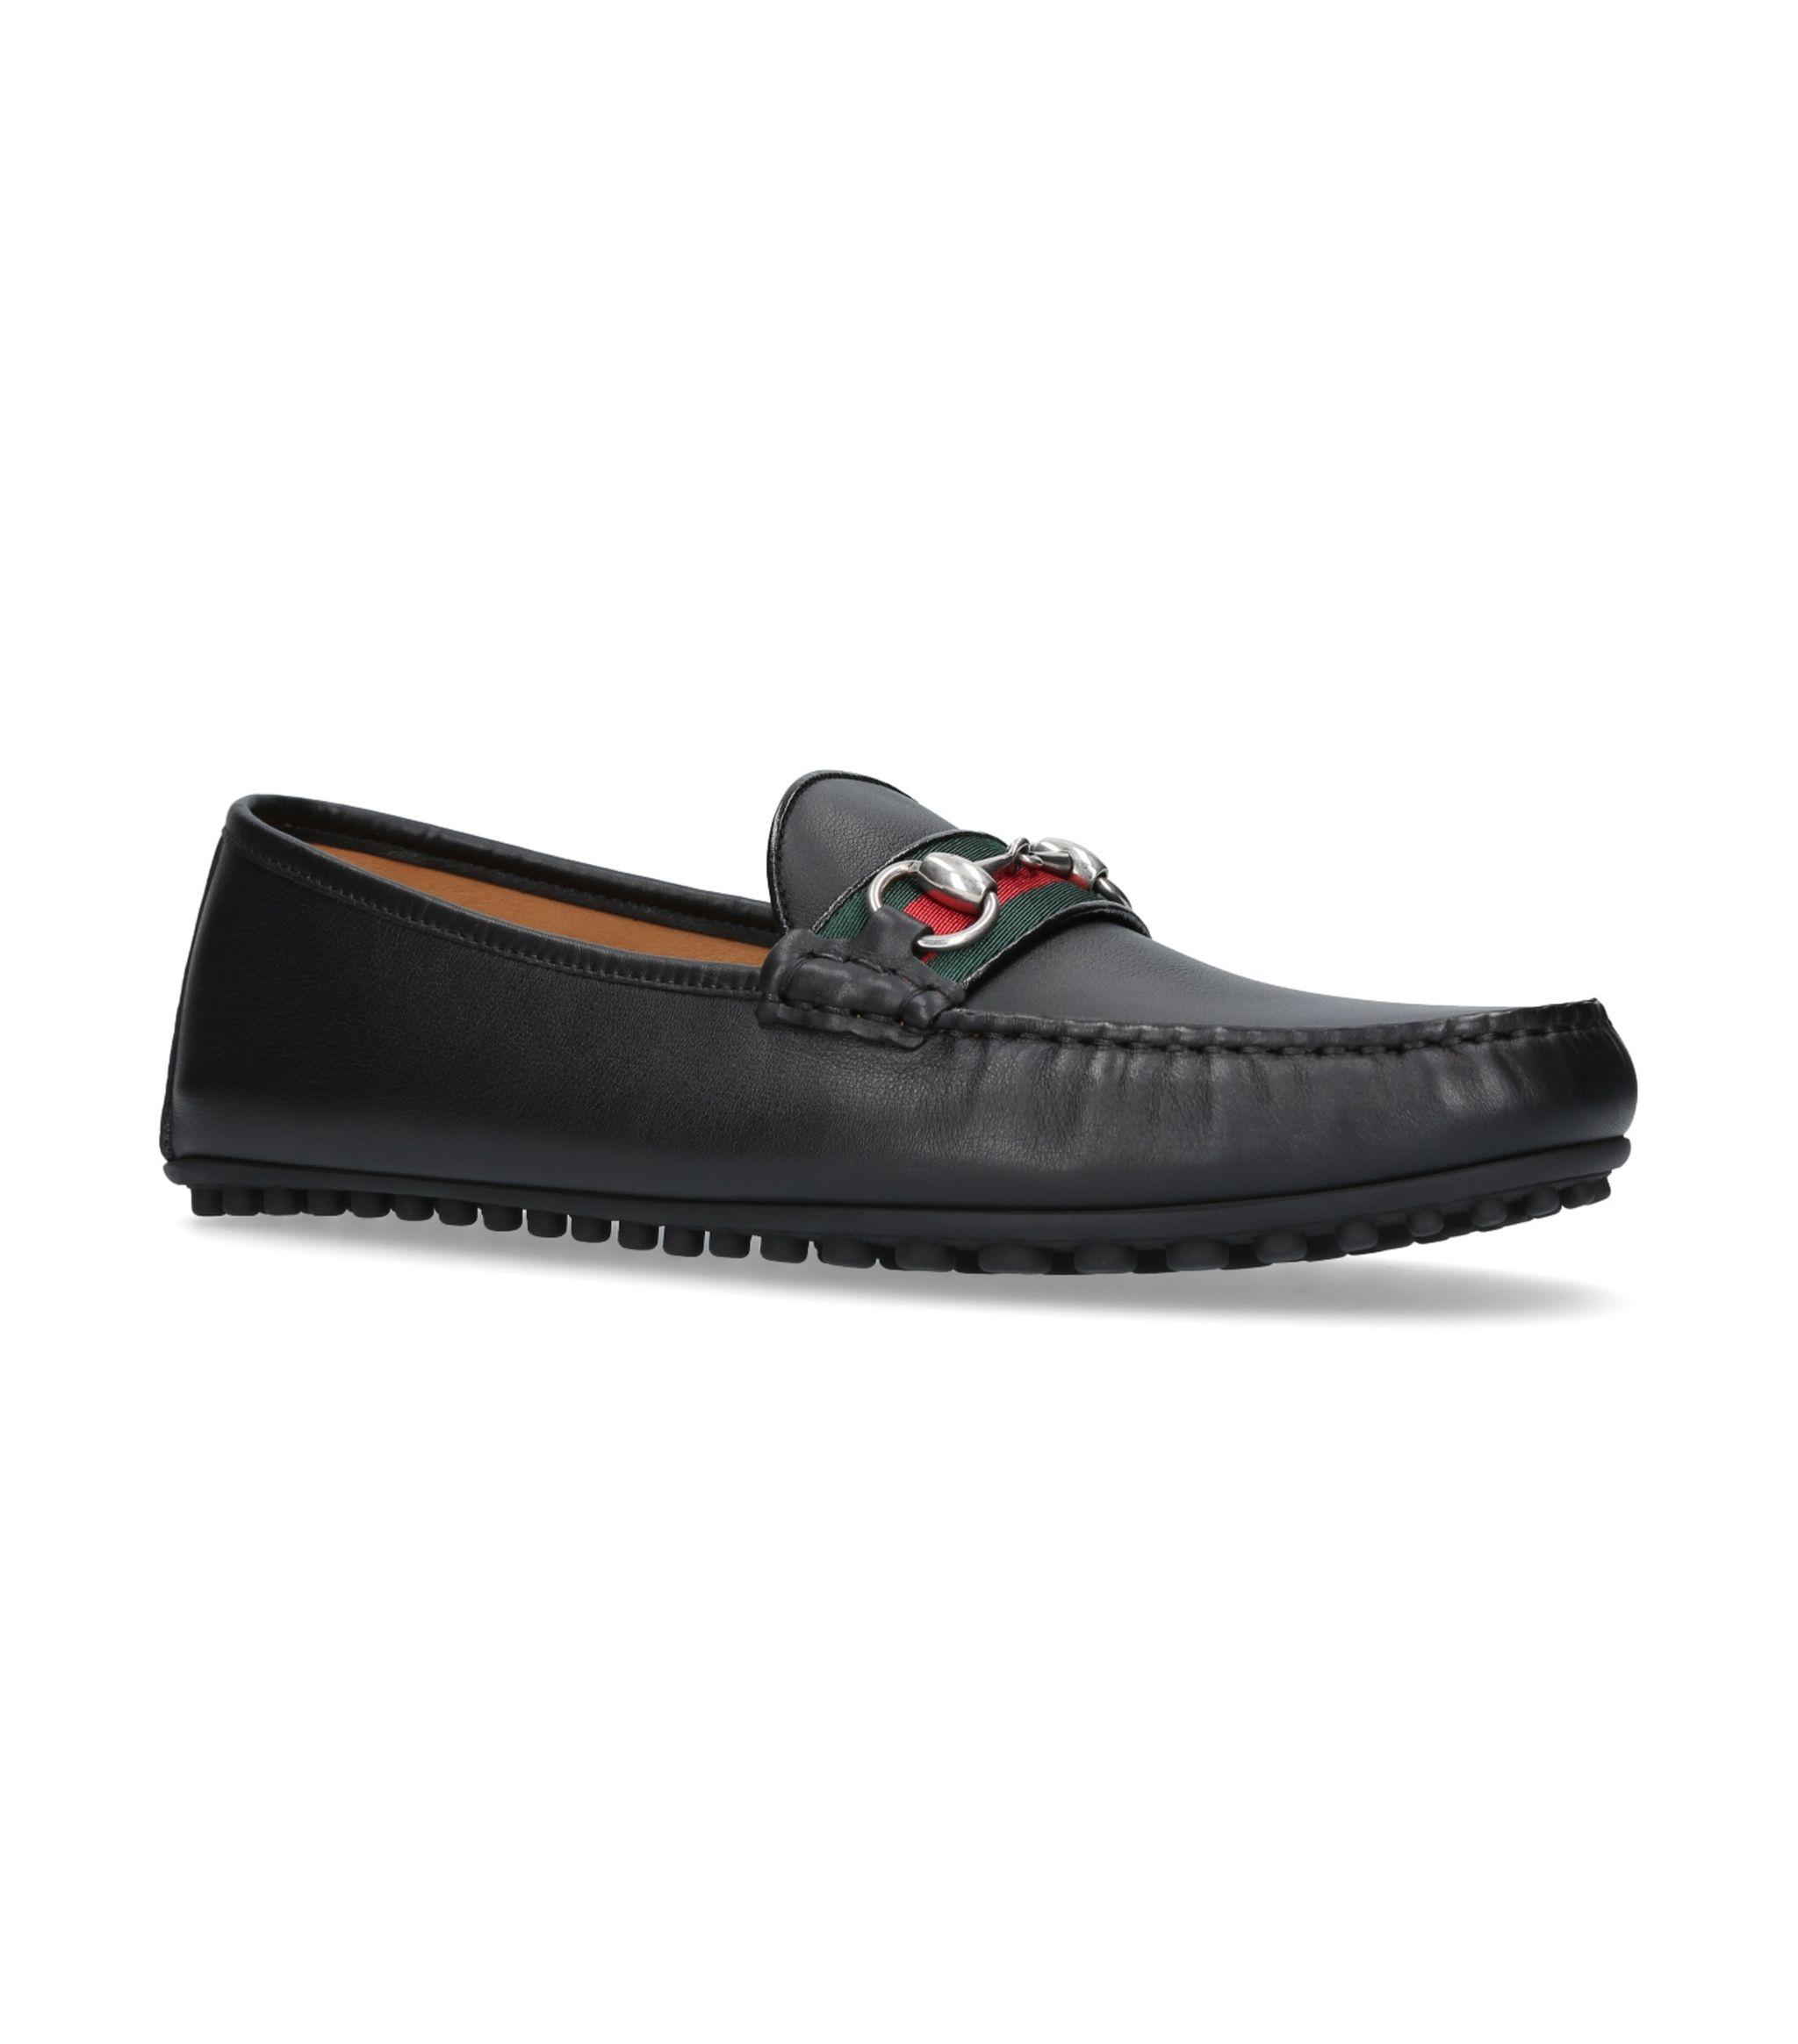 Gucci Kanye Leather Driving Shoes in Black for Men - Save 15% - Lyst